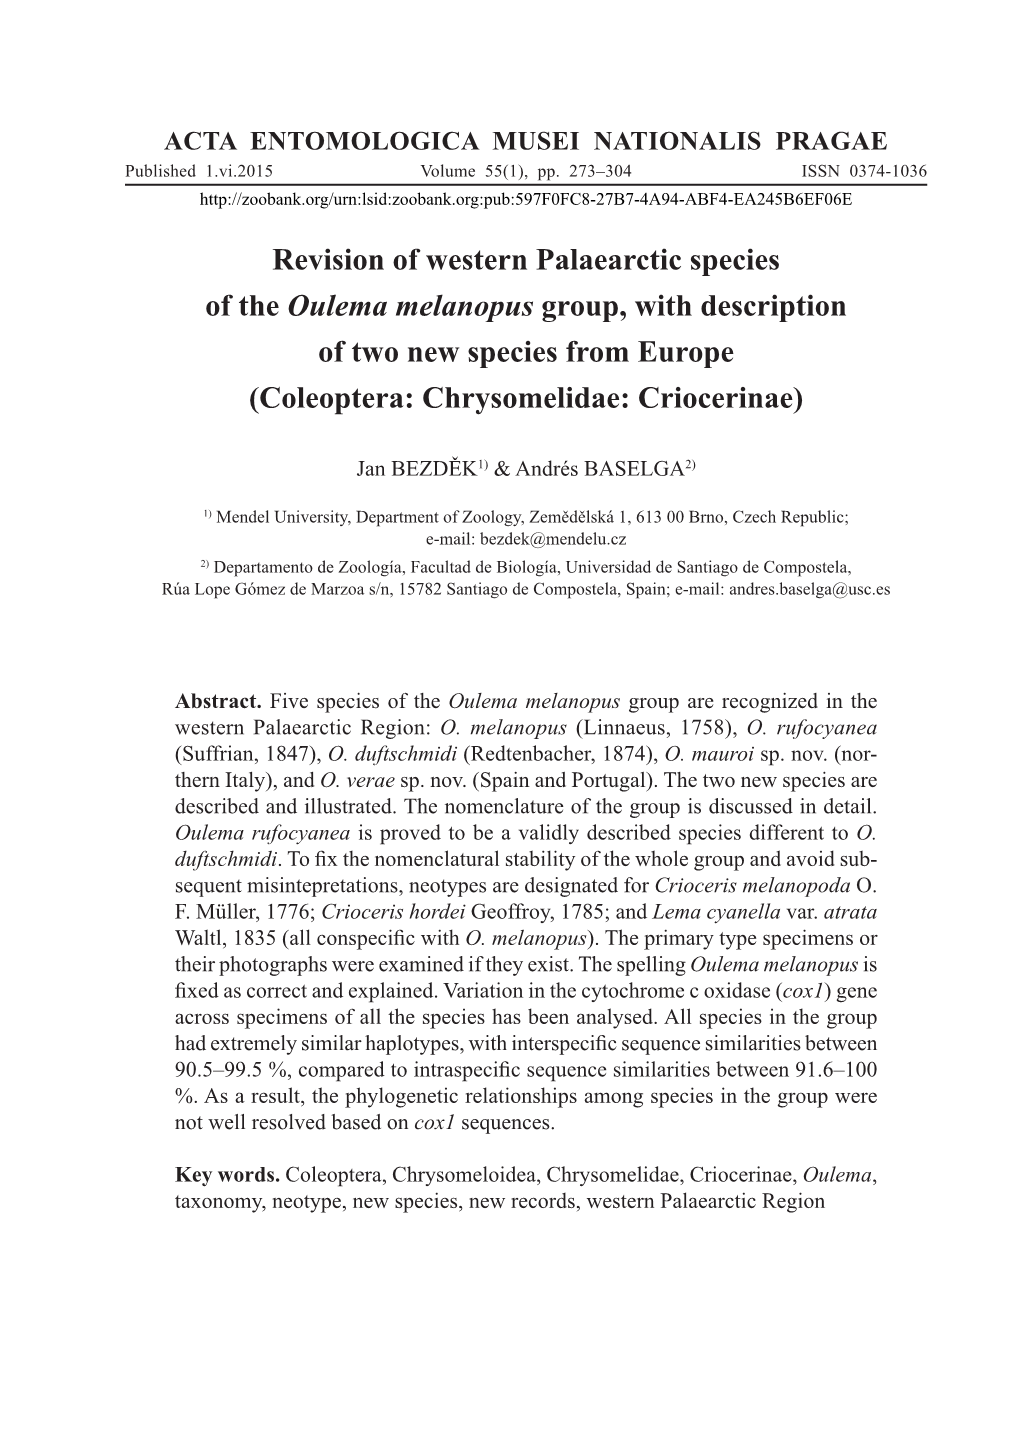 Revision of Western Palaearctic Species of the Oulema Melanopus Group, with Description of Two New Species from Europe (Coleoptera: Chrysomelidae: Criocerinae)